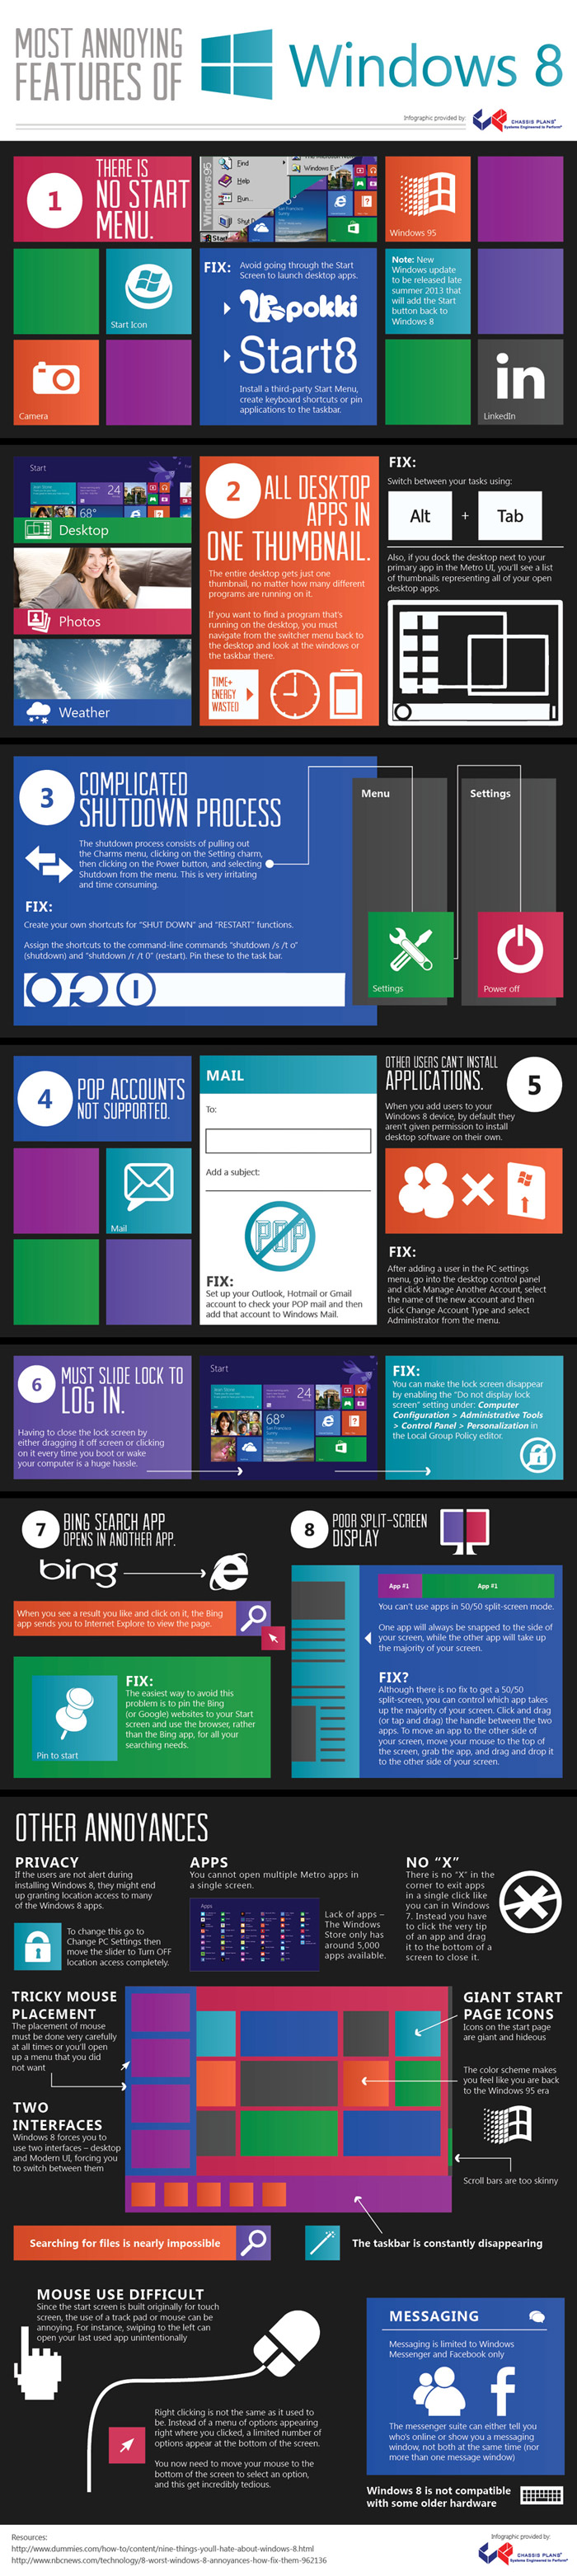 Most Annoying Features of Windows 8